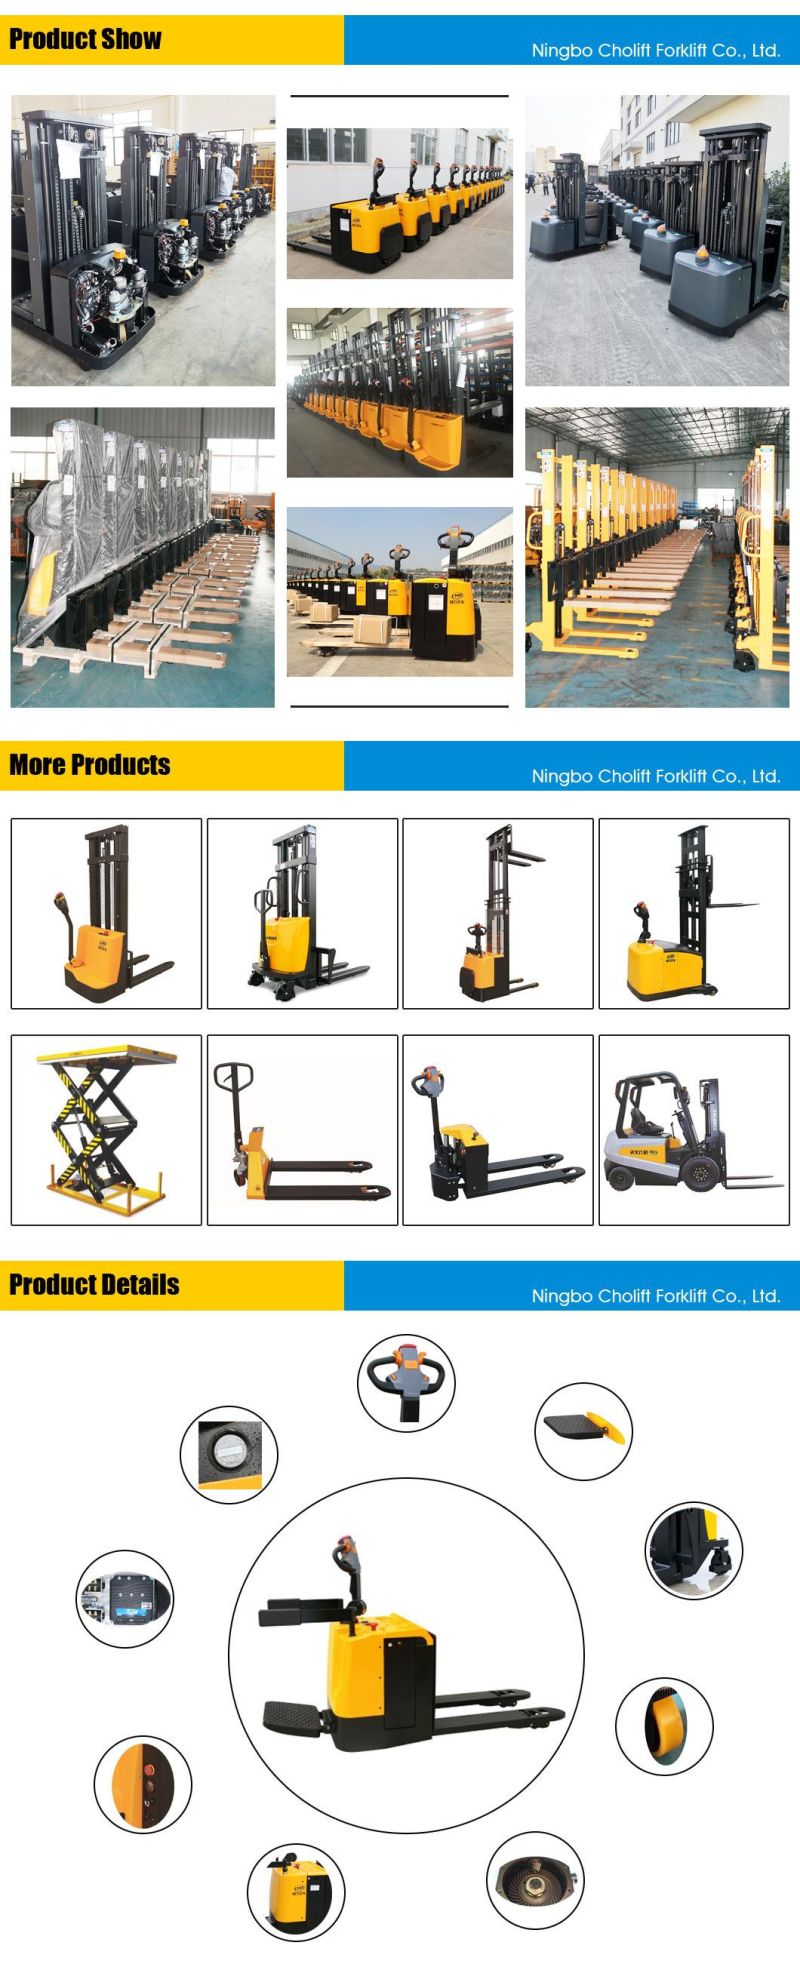 Cholift Bda Series Semi Electric Pallet Stacker with Good Quality